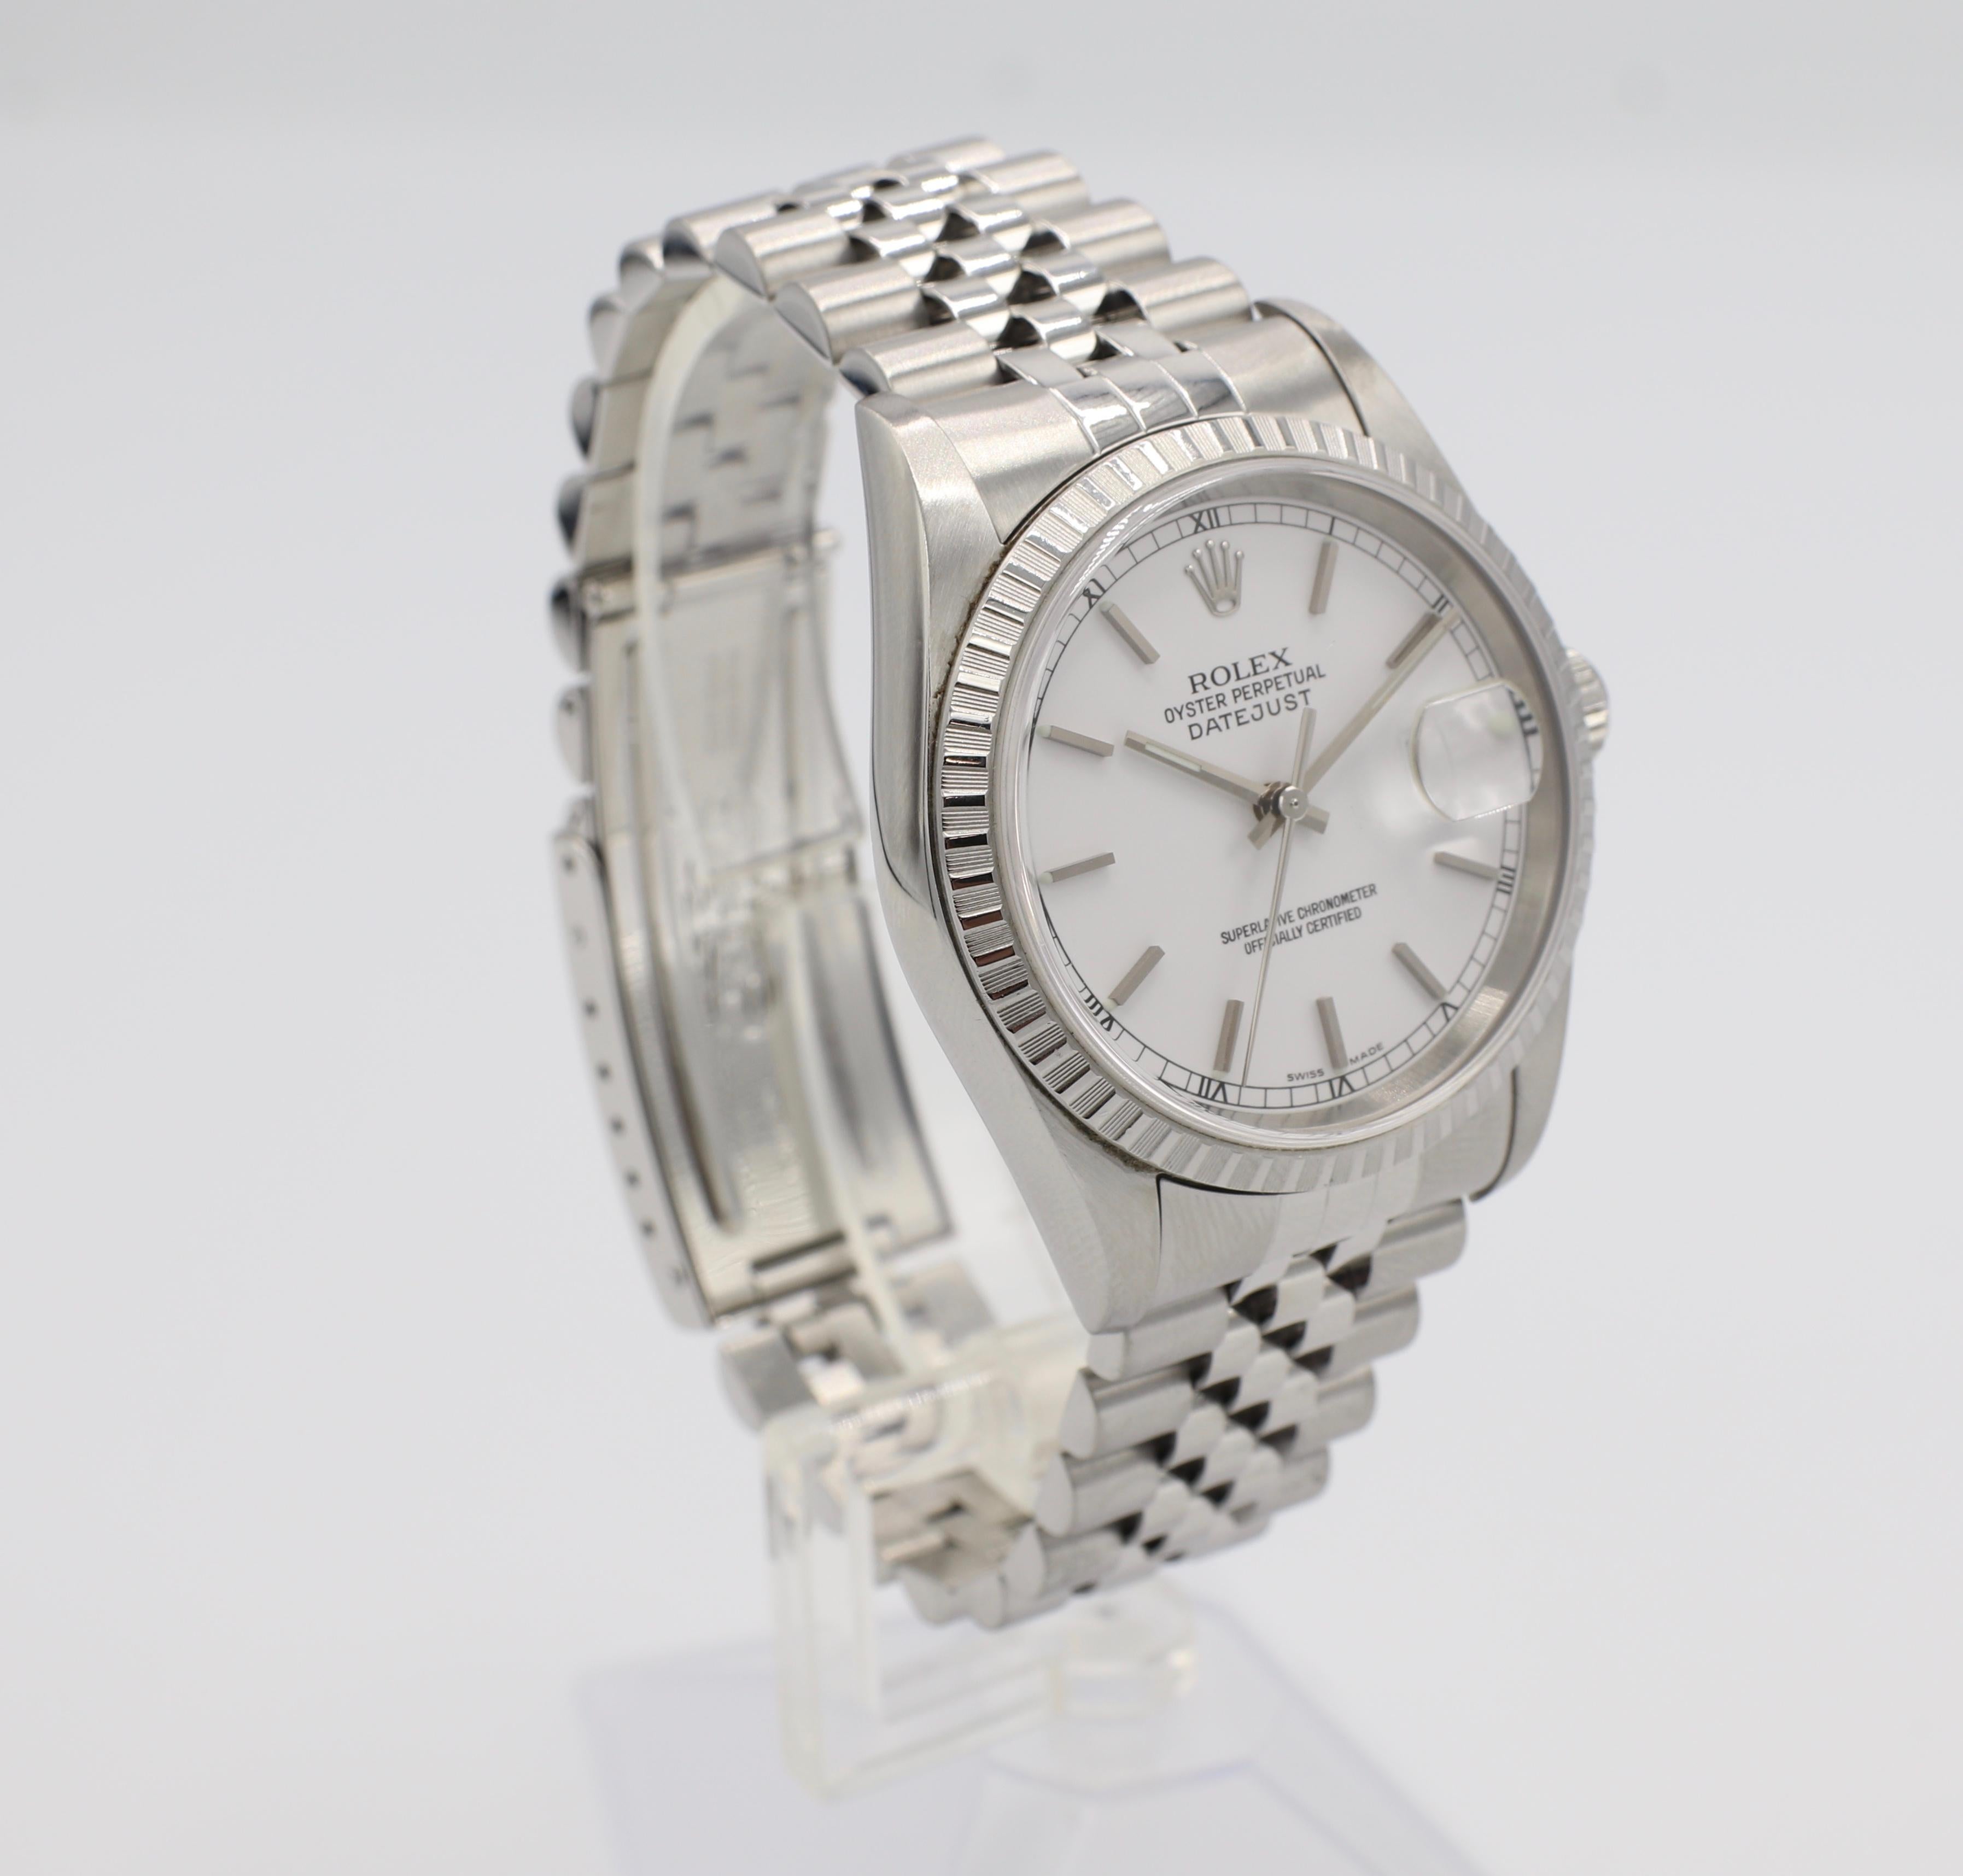 Rolex DateJust 16220 Stainless Steel White Dial Jubilee Bracelet Watch 

Model: 16220
Serial: F573***  (circa 2003-2005)
Case size: 36mm
Metal: Stainless Steel
Bracelet: Jubilee
Dial: White
Movement: Automatic
Crystal: Sapphire
Box included as